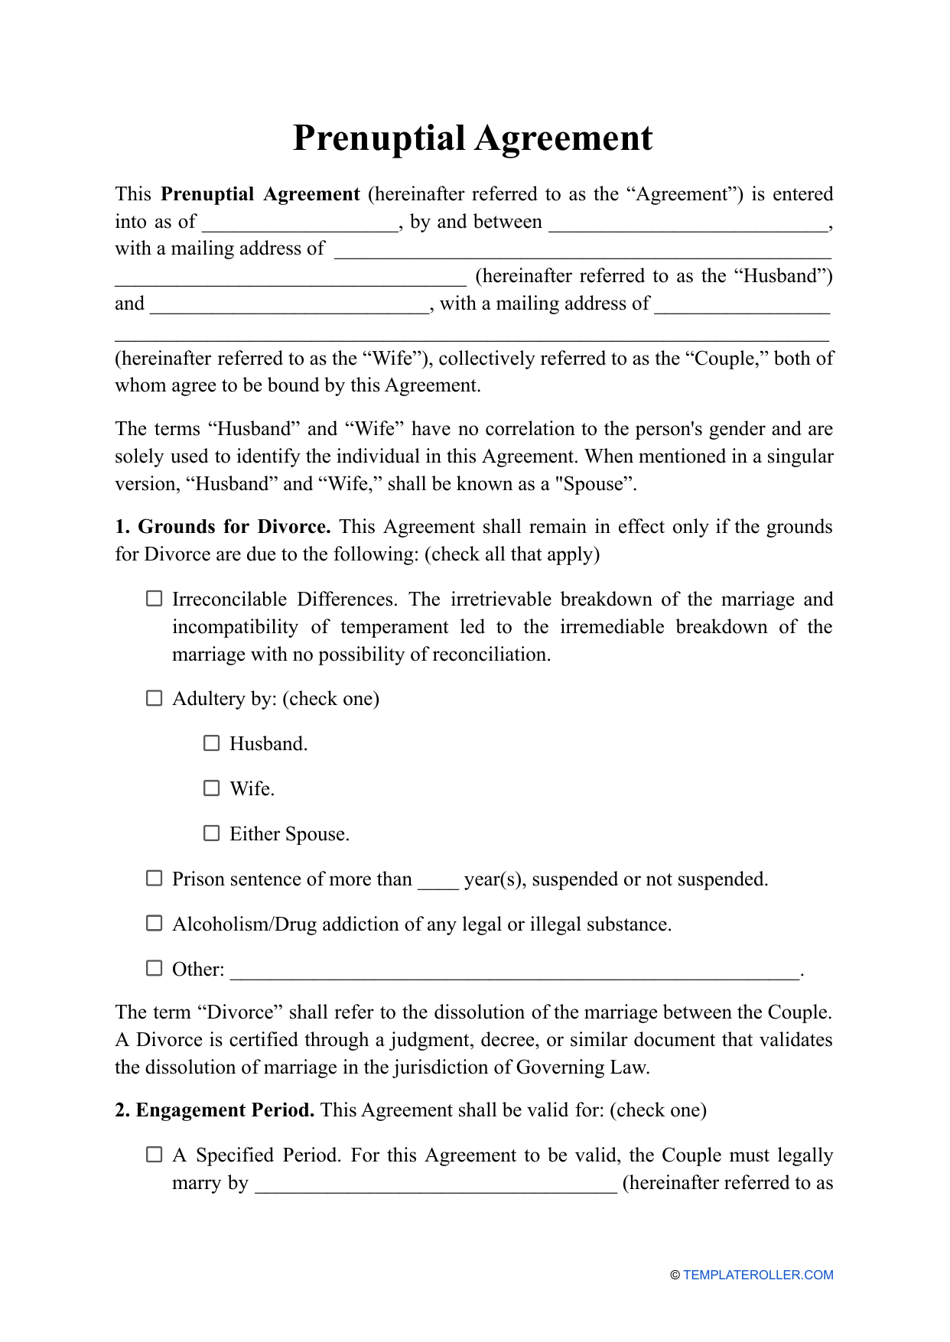 Prenuptial Agreement Template, Page 1